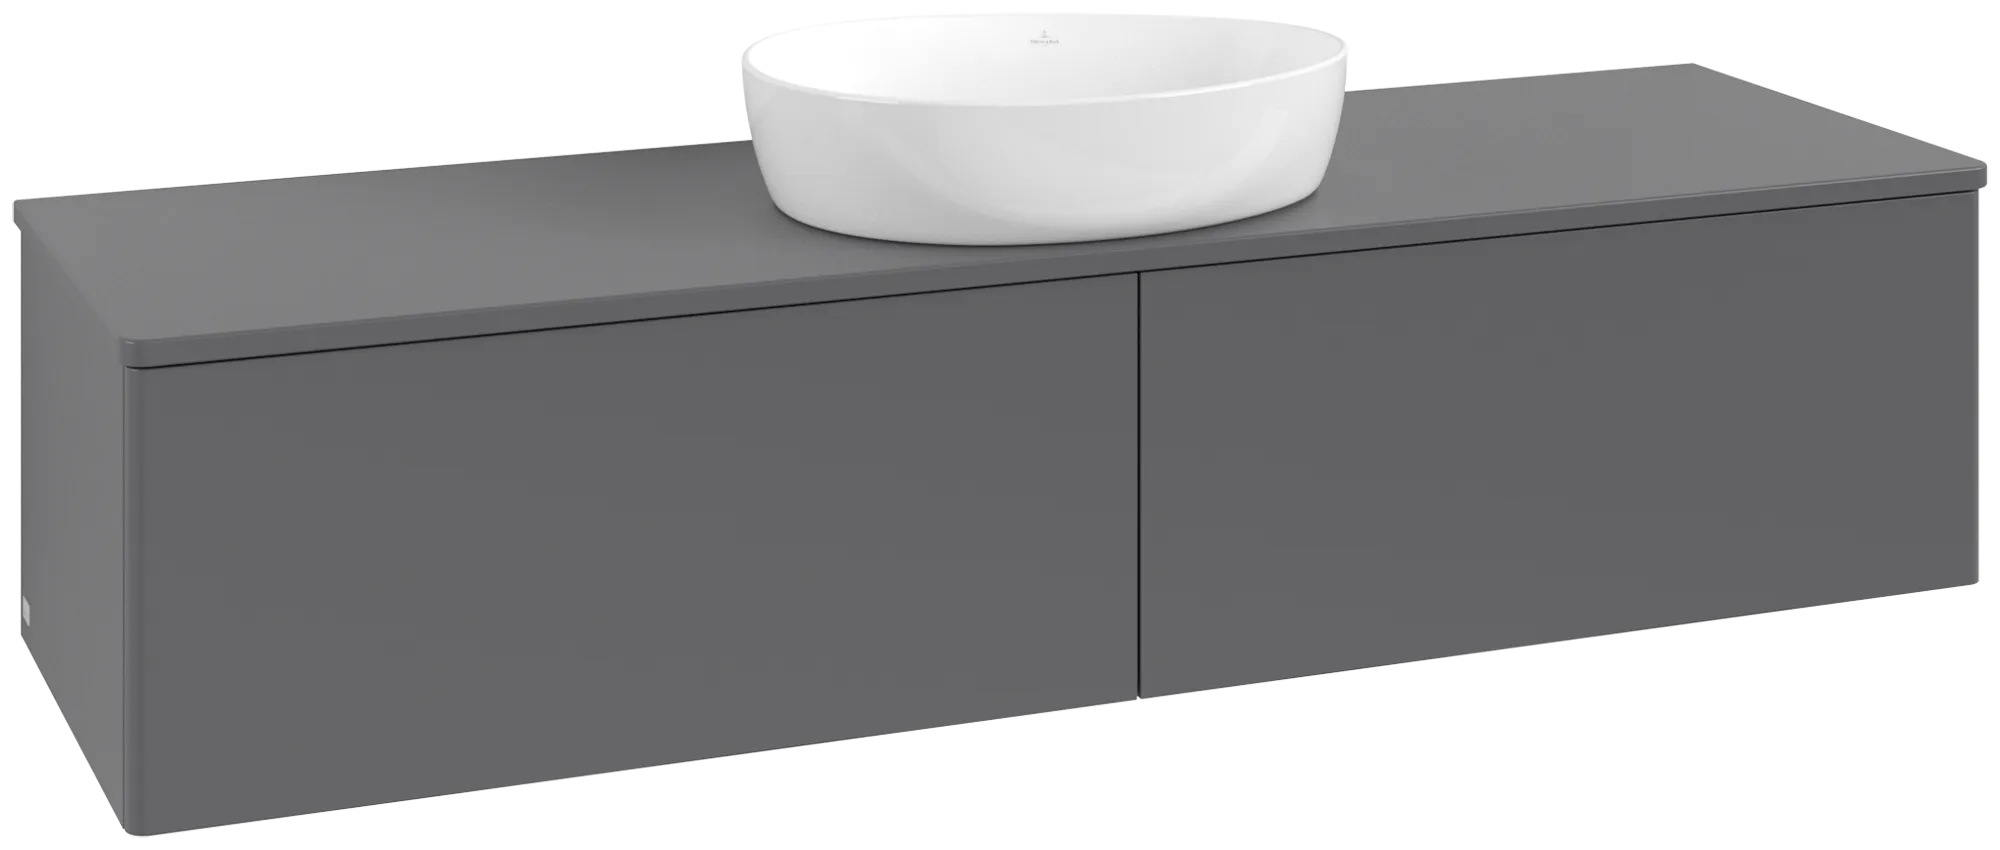 Picture of VILLEROY BOCH Antao Vanity unit, with lighting, 2 pull-out compartments, 1600 x 360 x 500 mm, Front without structure, Anthracite Matt Lacquer / Anthracite Matt Lacquer #L36010GK